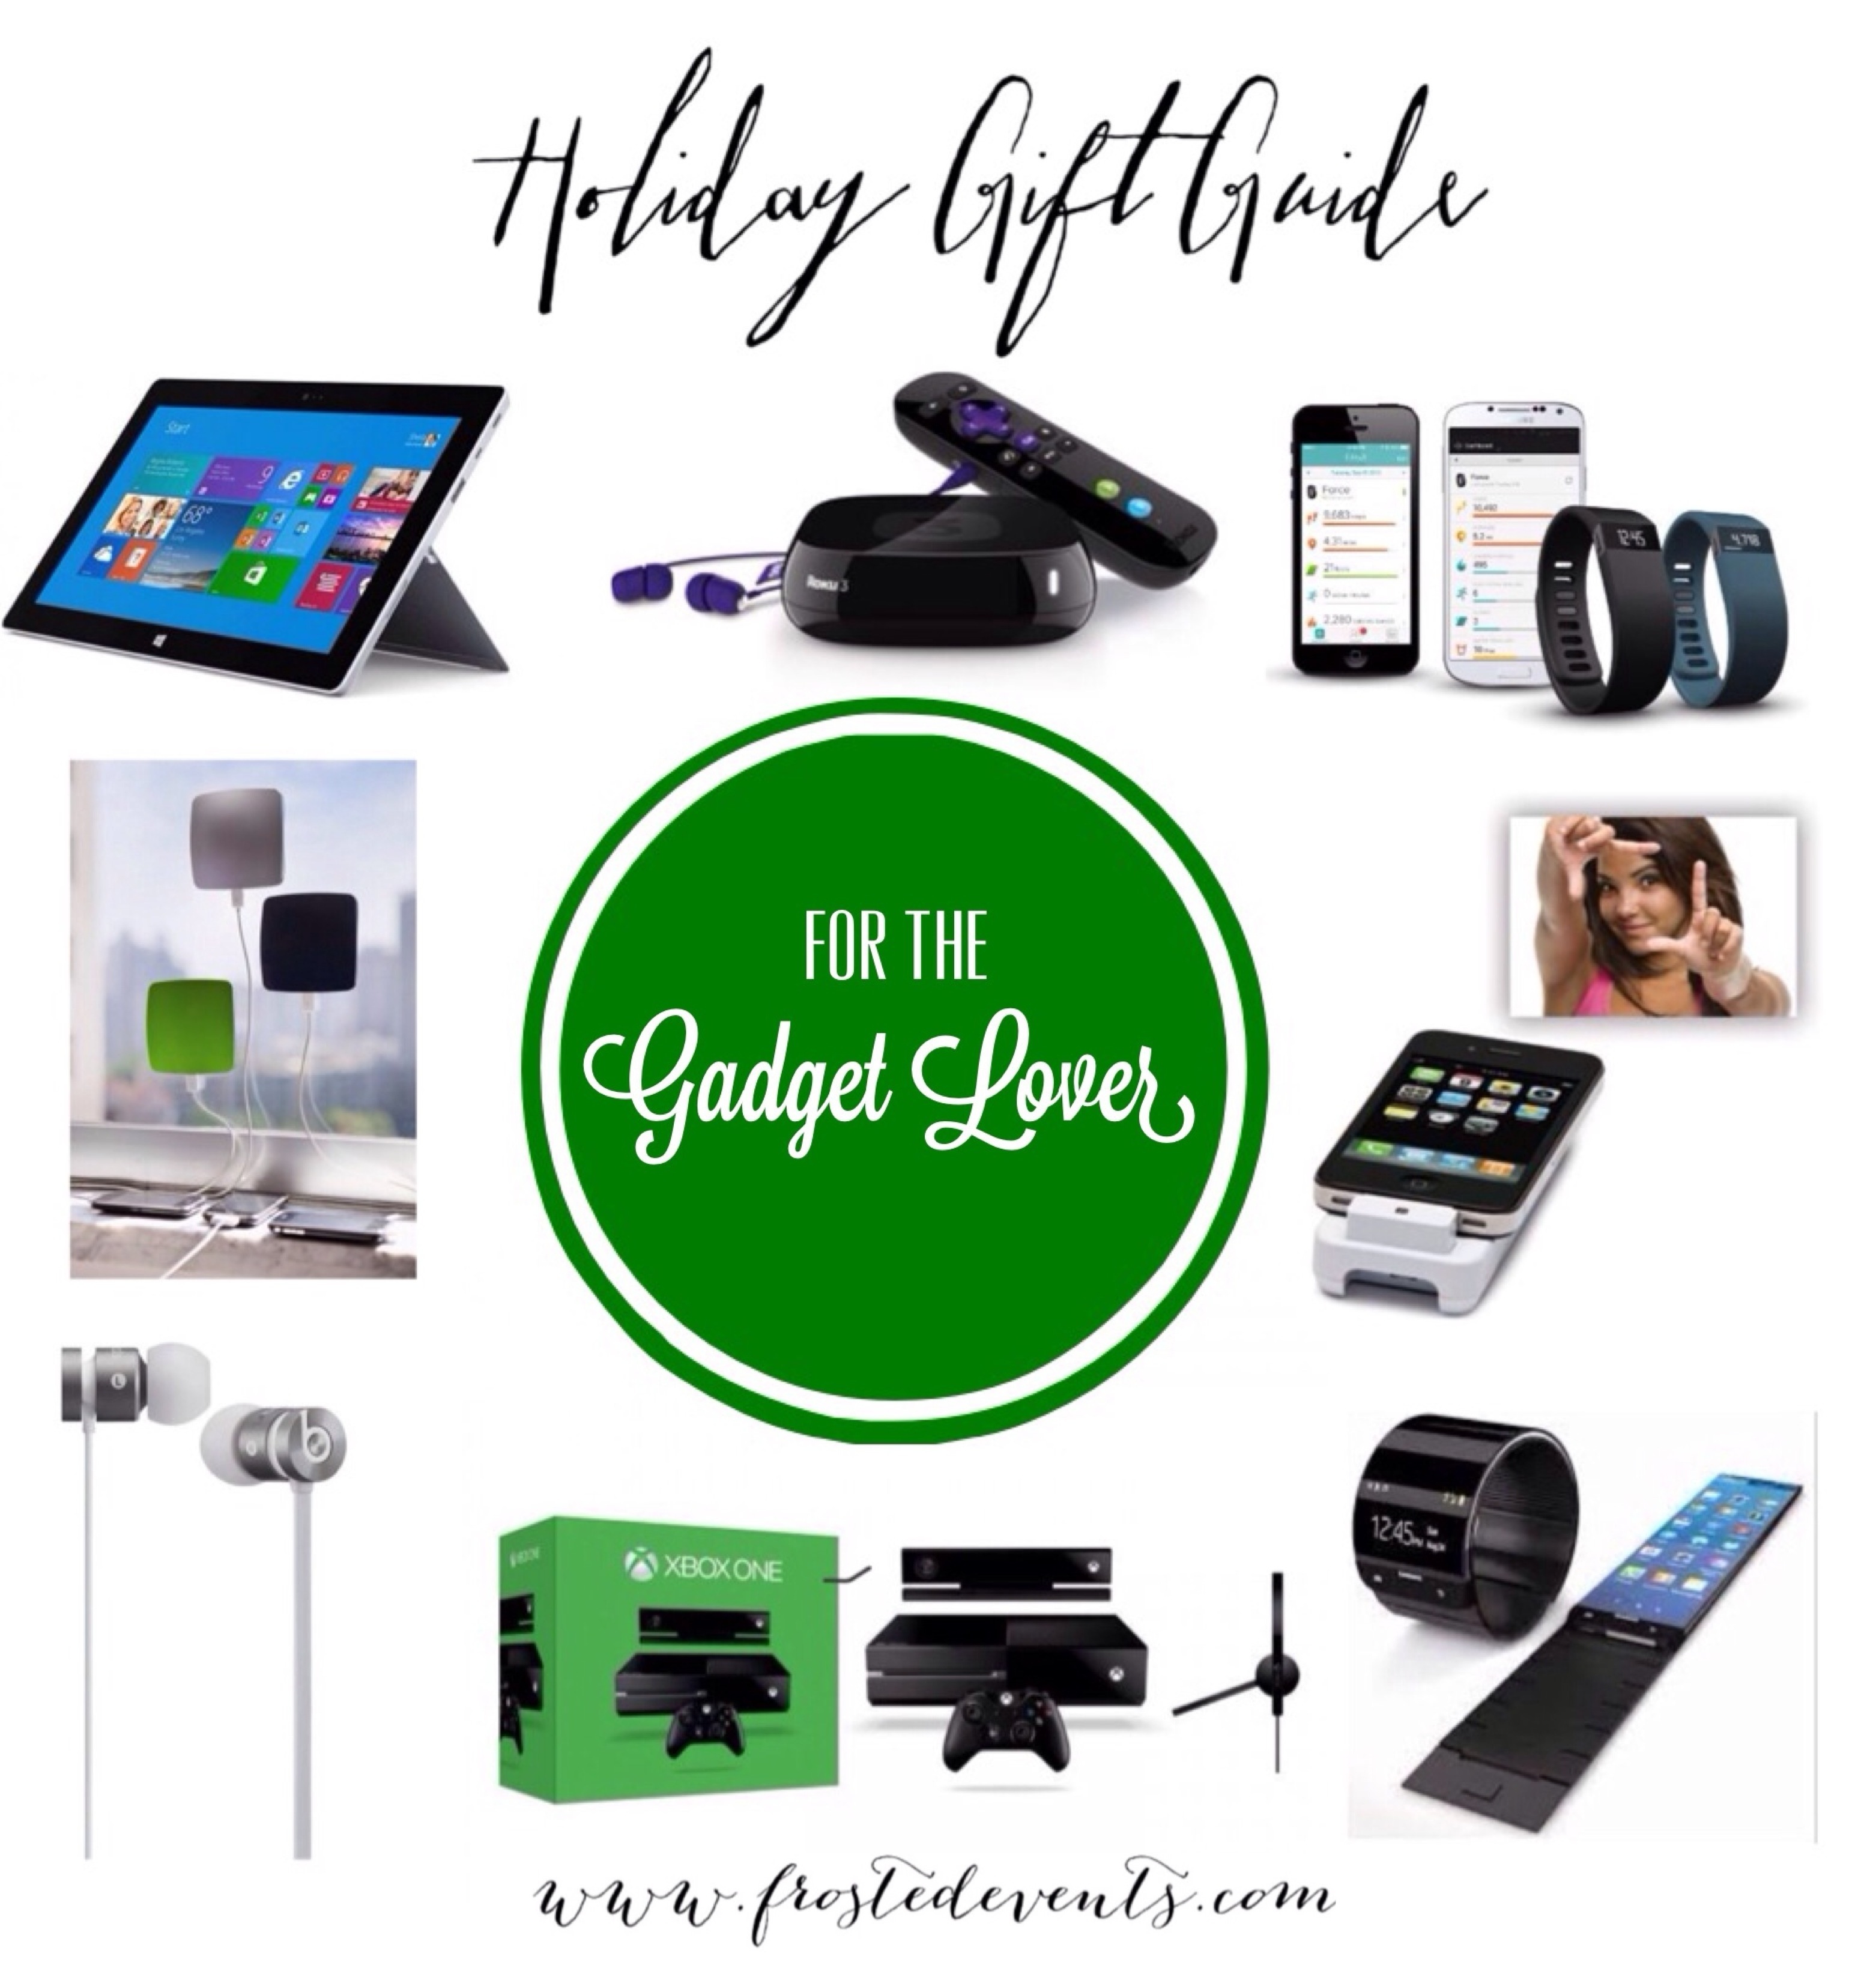 Holiday Gift Guide for Gadget Lovers www.frostedevents.com Christmas Gift Ideas